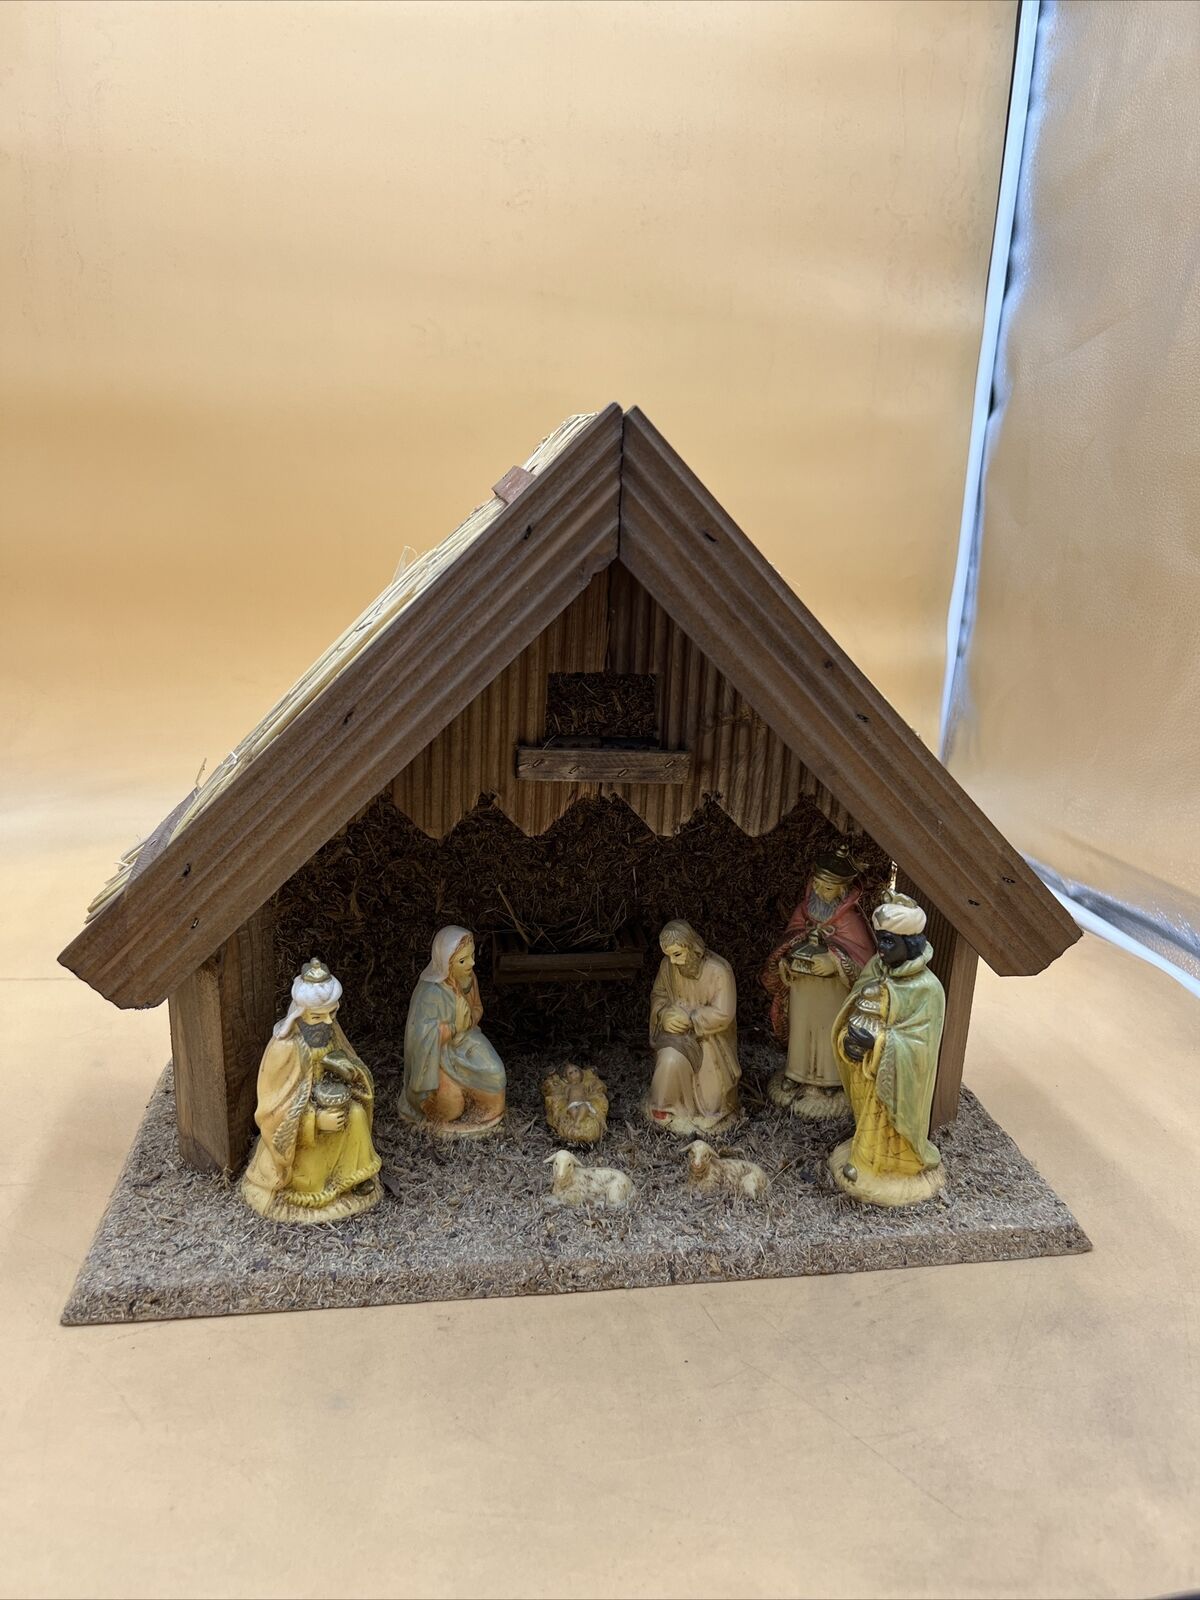 VINAGE CHRISTMAS NATIVITY SET WOODEN WITH PLASTIC FIGURINES